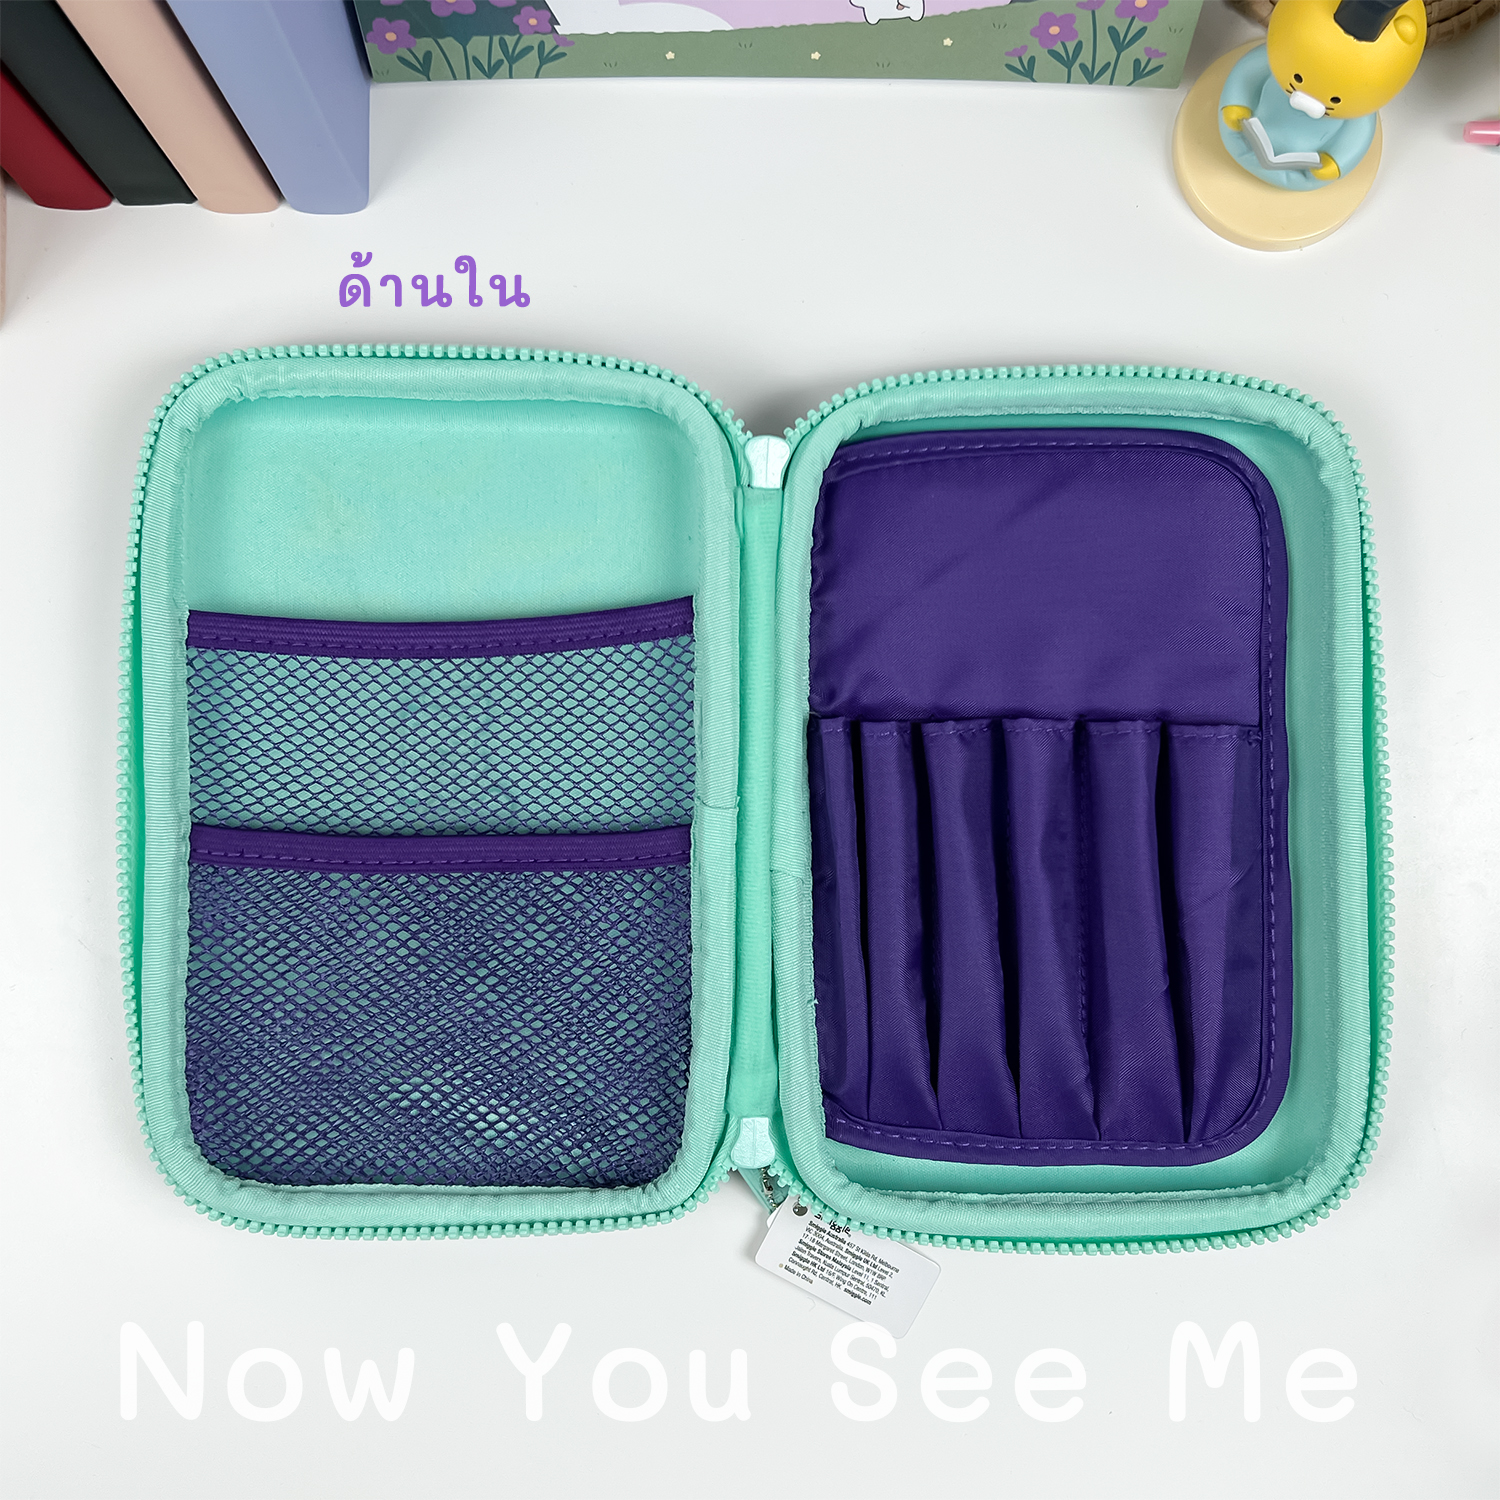 5 Smiggle – Now you see me purple – inside